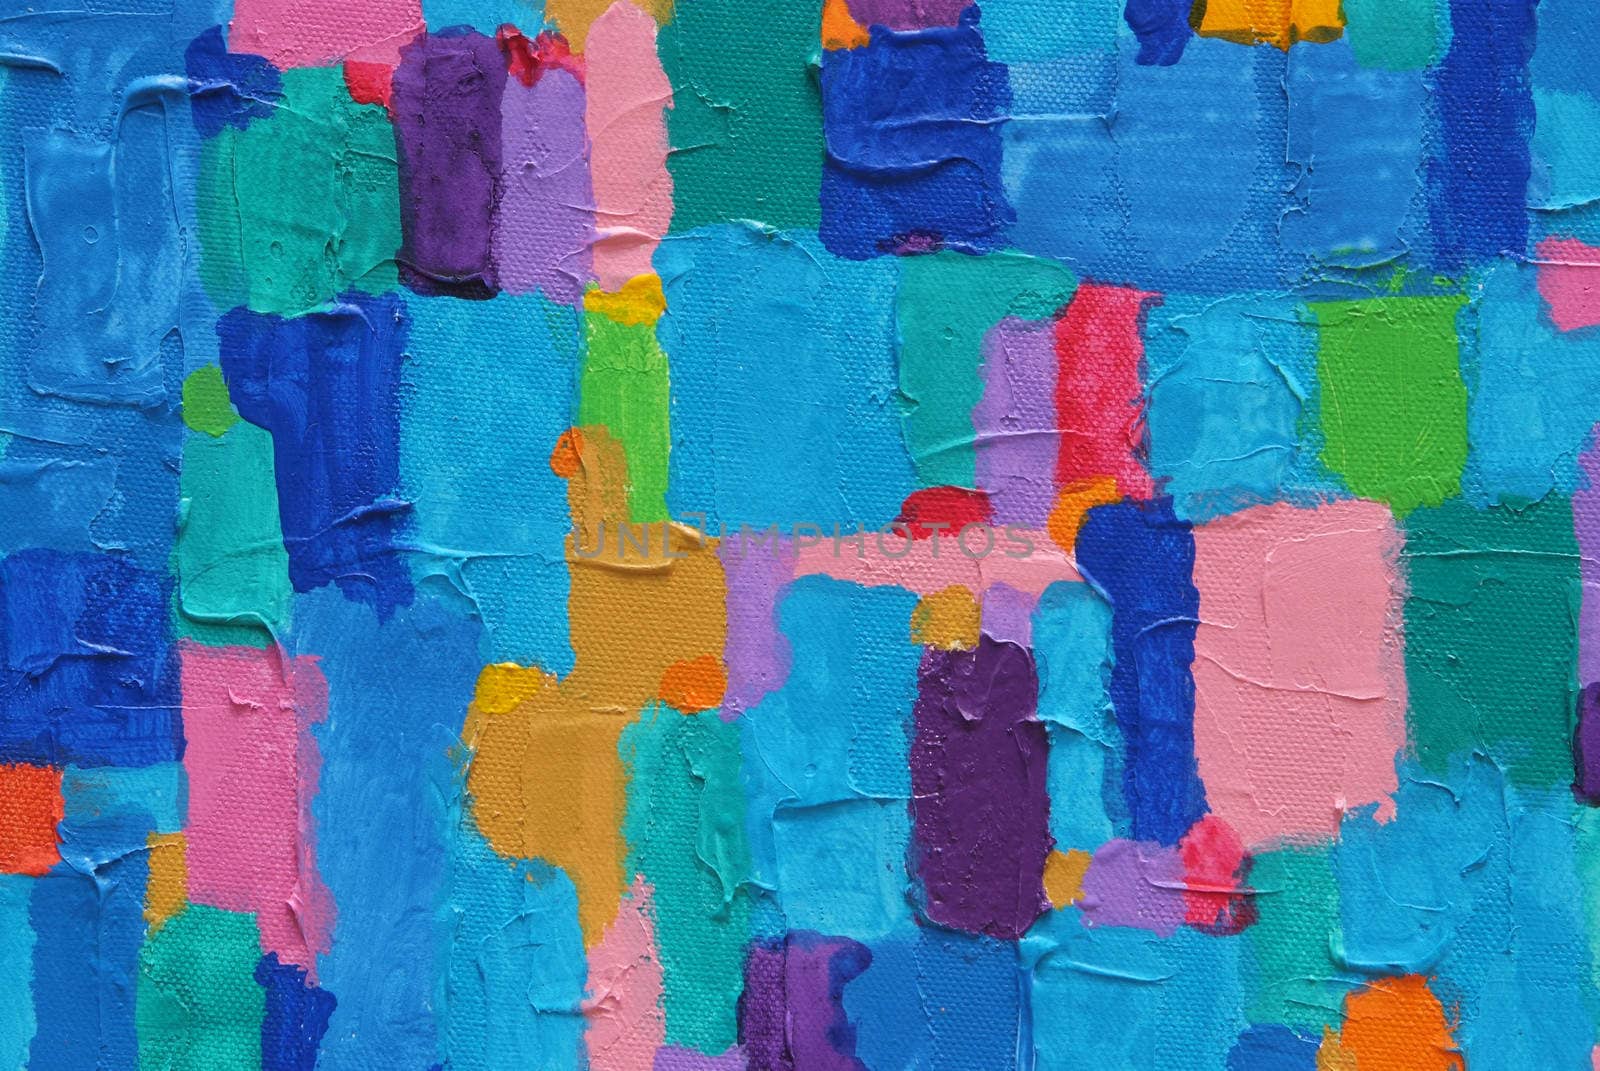 "Blue Land 2013" Texture, background and Colorful Image of an original Abstract Painting on Canvas 